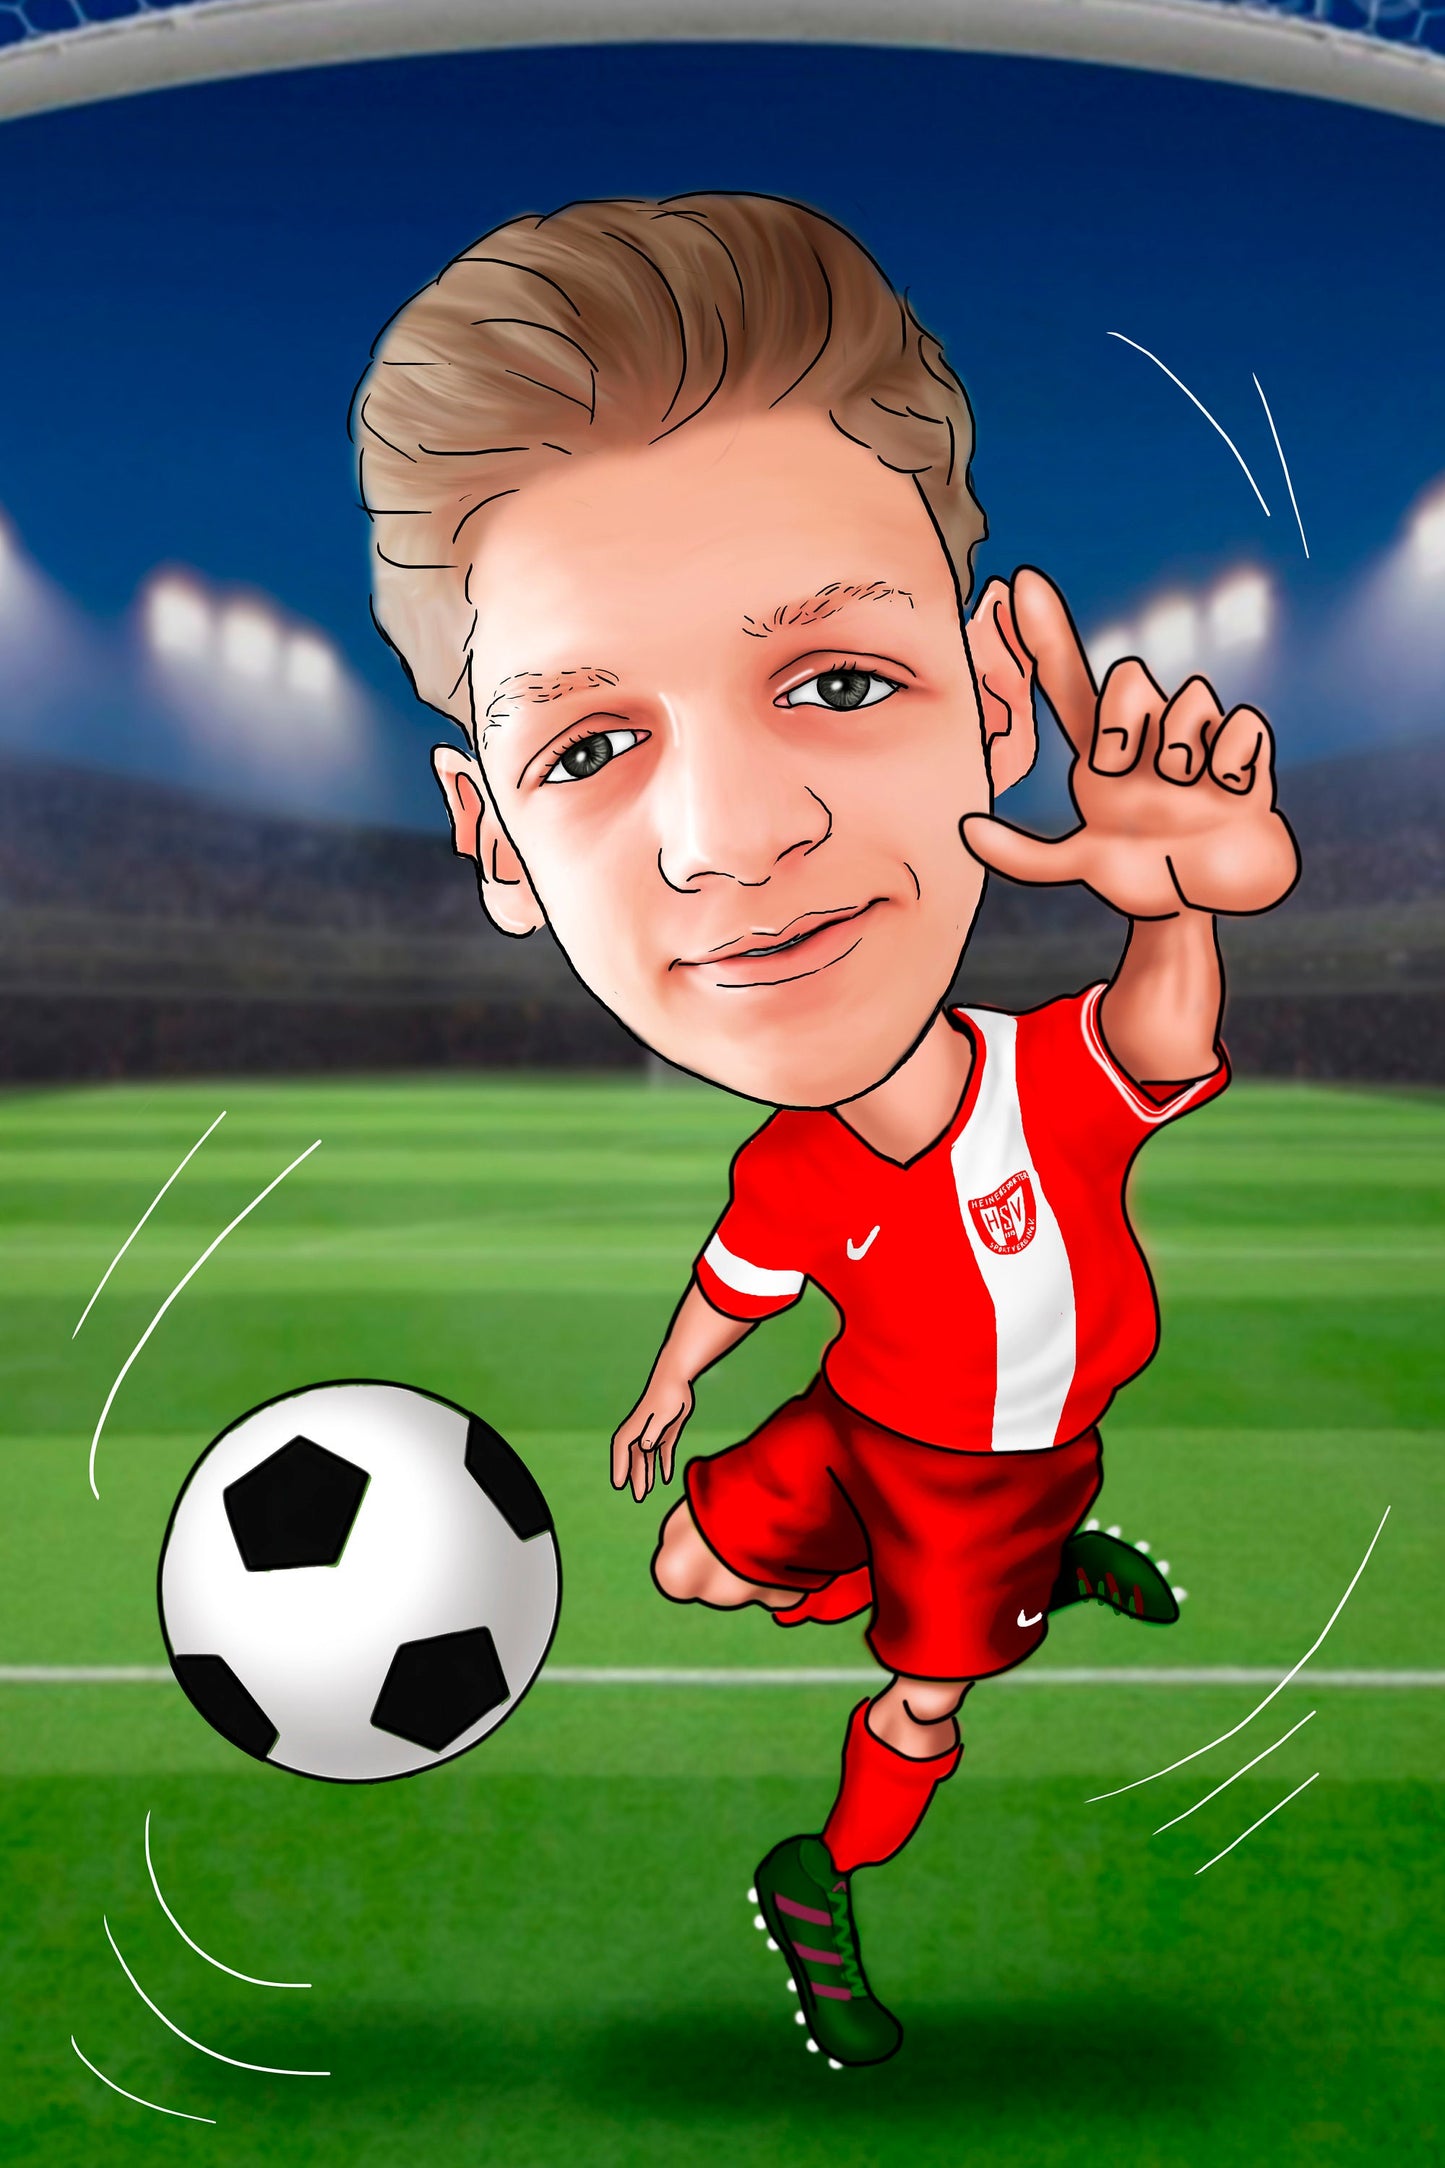 Soccer Player Gift - custom caricature portrait from your photo/soccer coach gifts/soccer gifts/football player gift